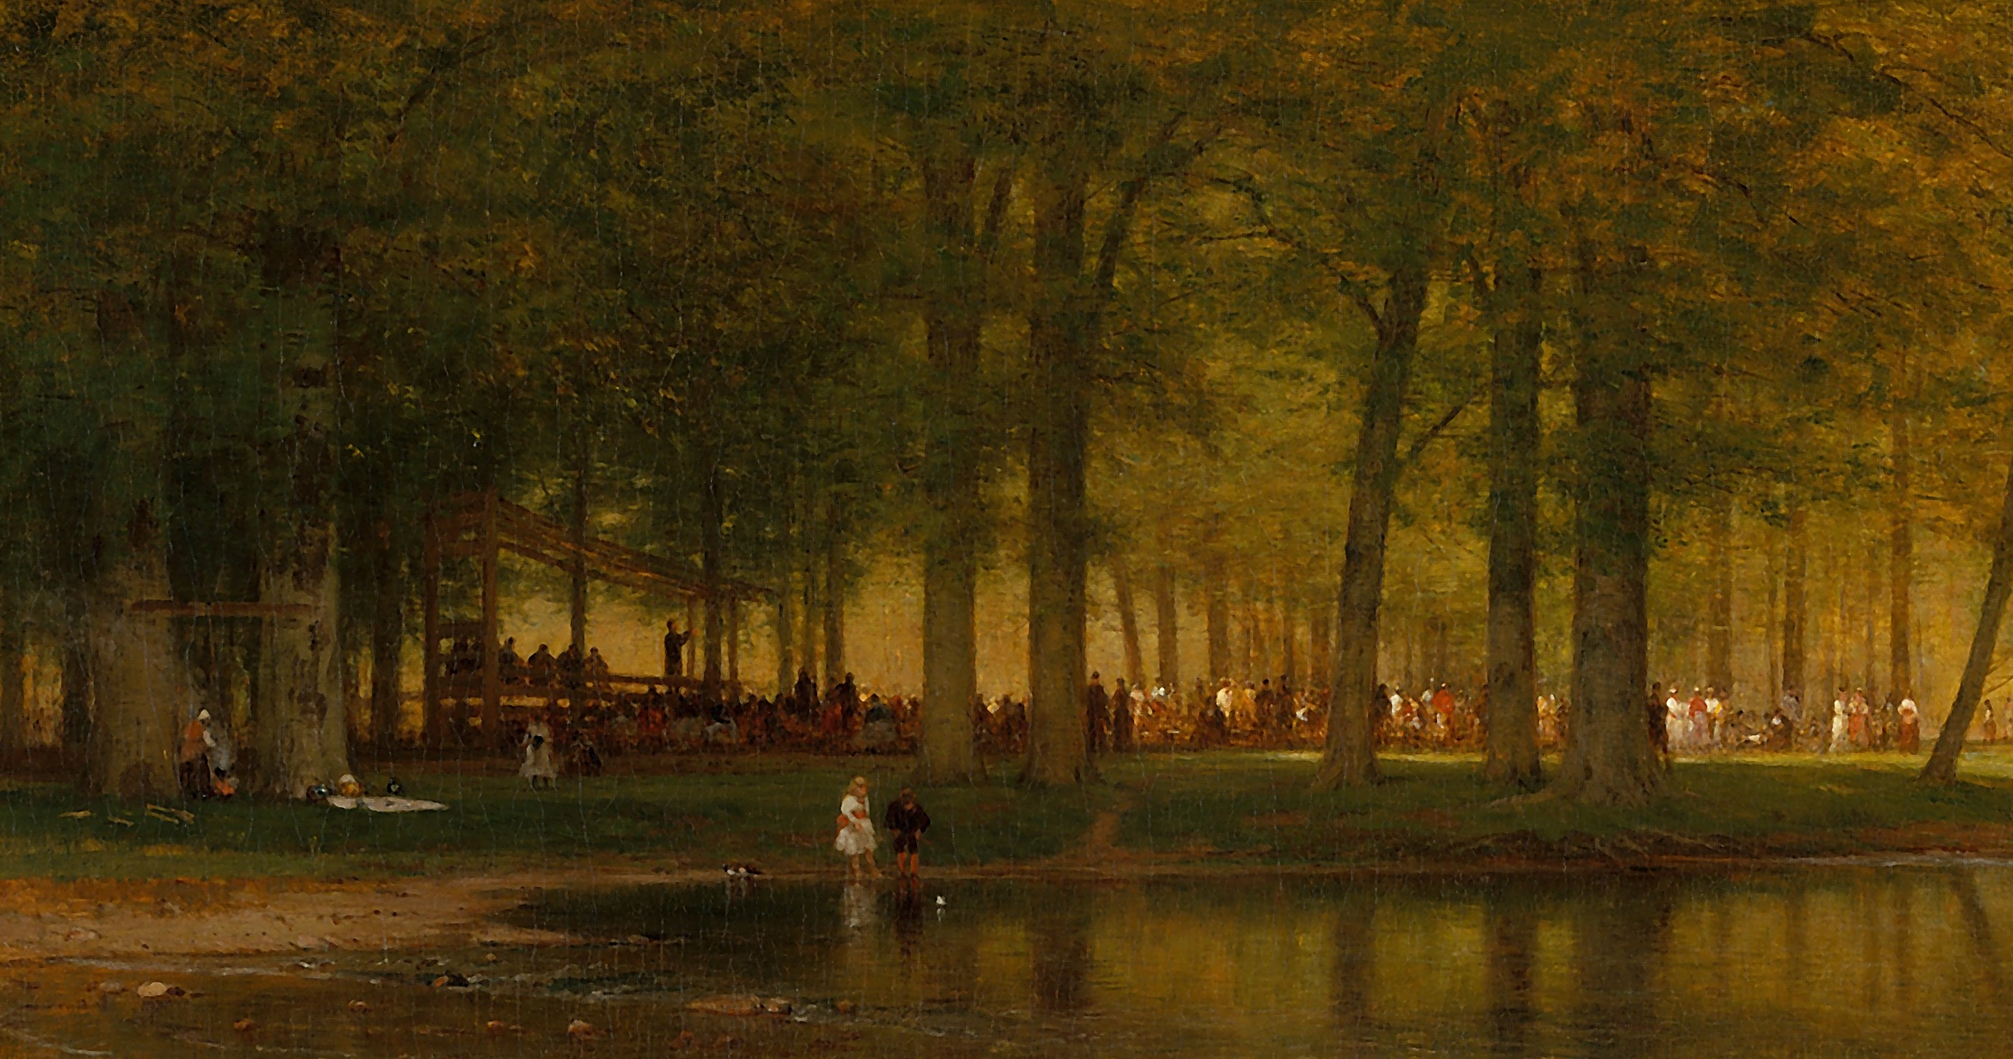 Painting depicts Joseph Smith meeting with saints outdoors under the cover of trees and near a pond in a camp meeting.